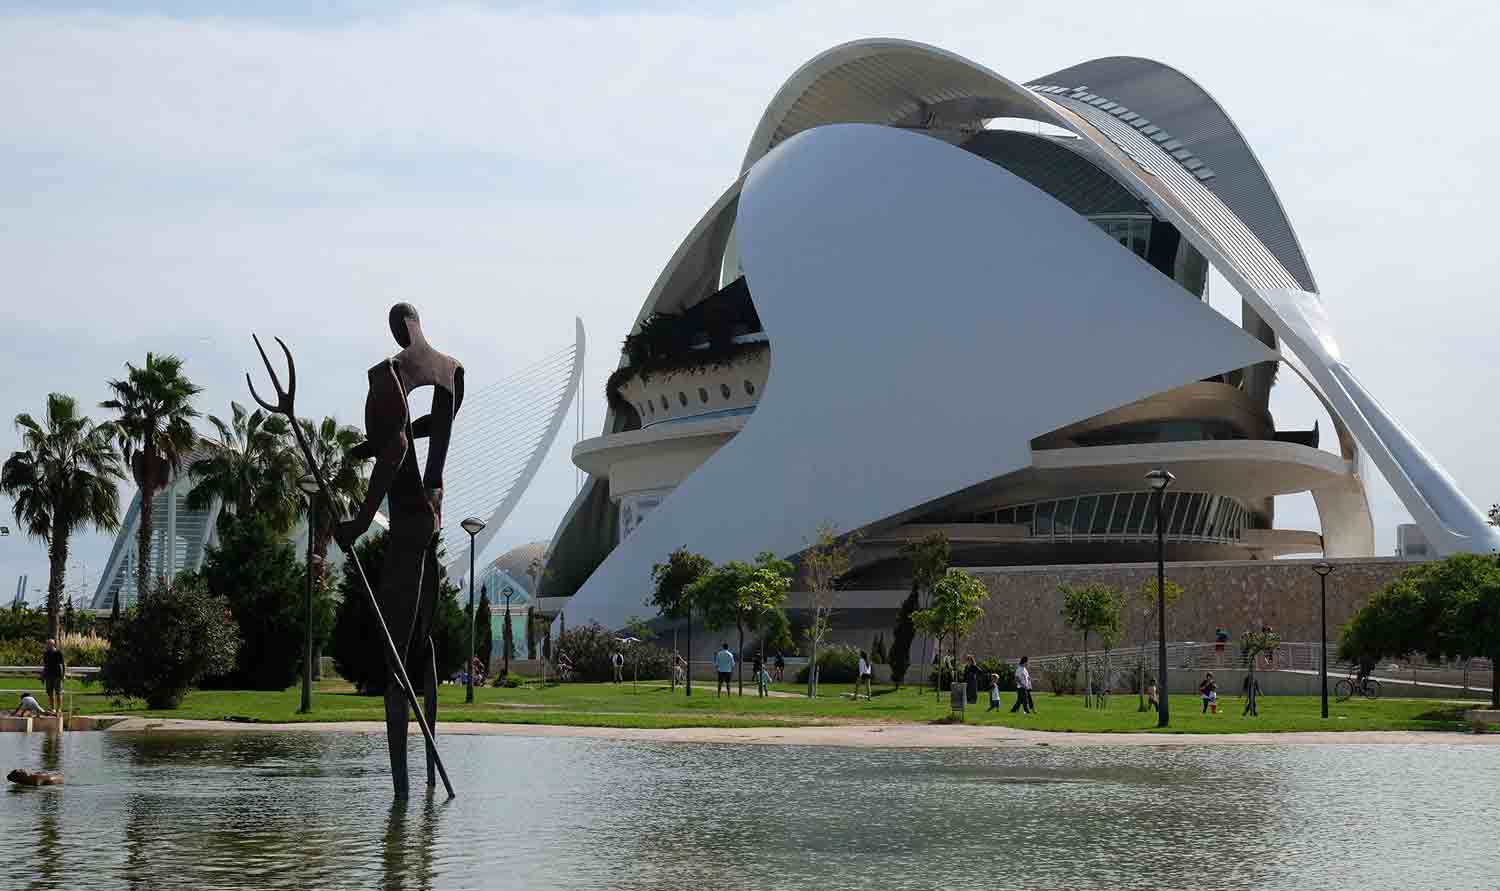 The City of Arts and Sciences sits at the eastern end of the Turia Gardens